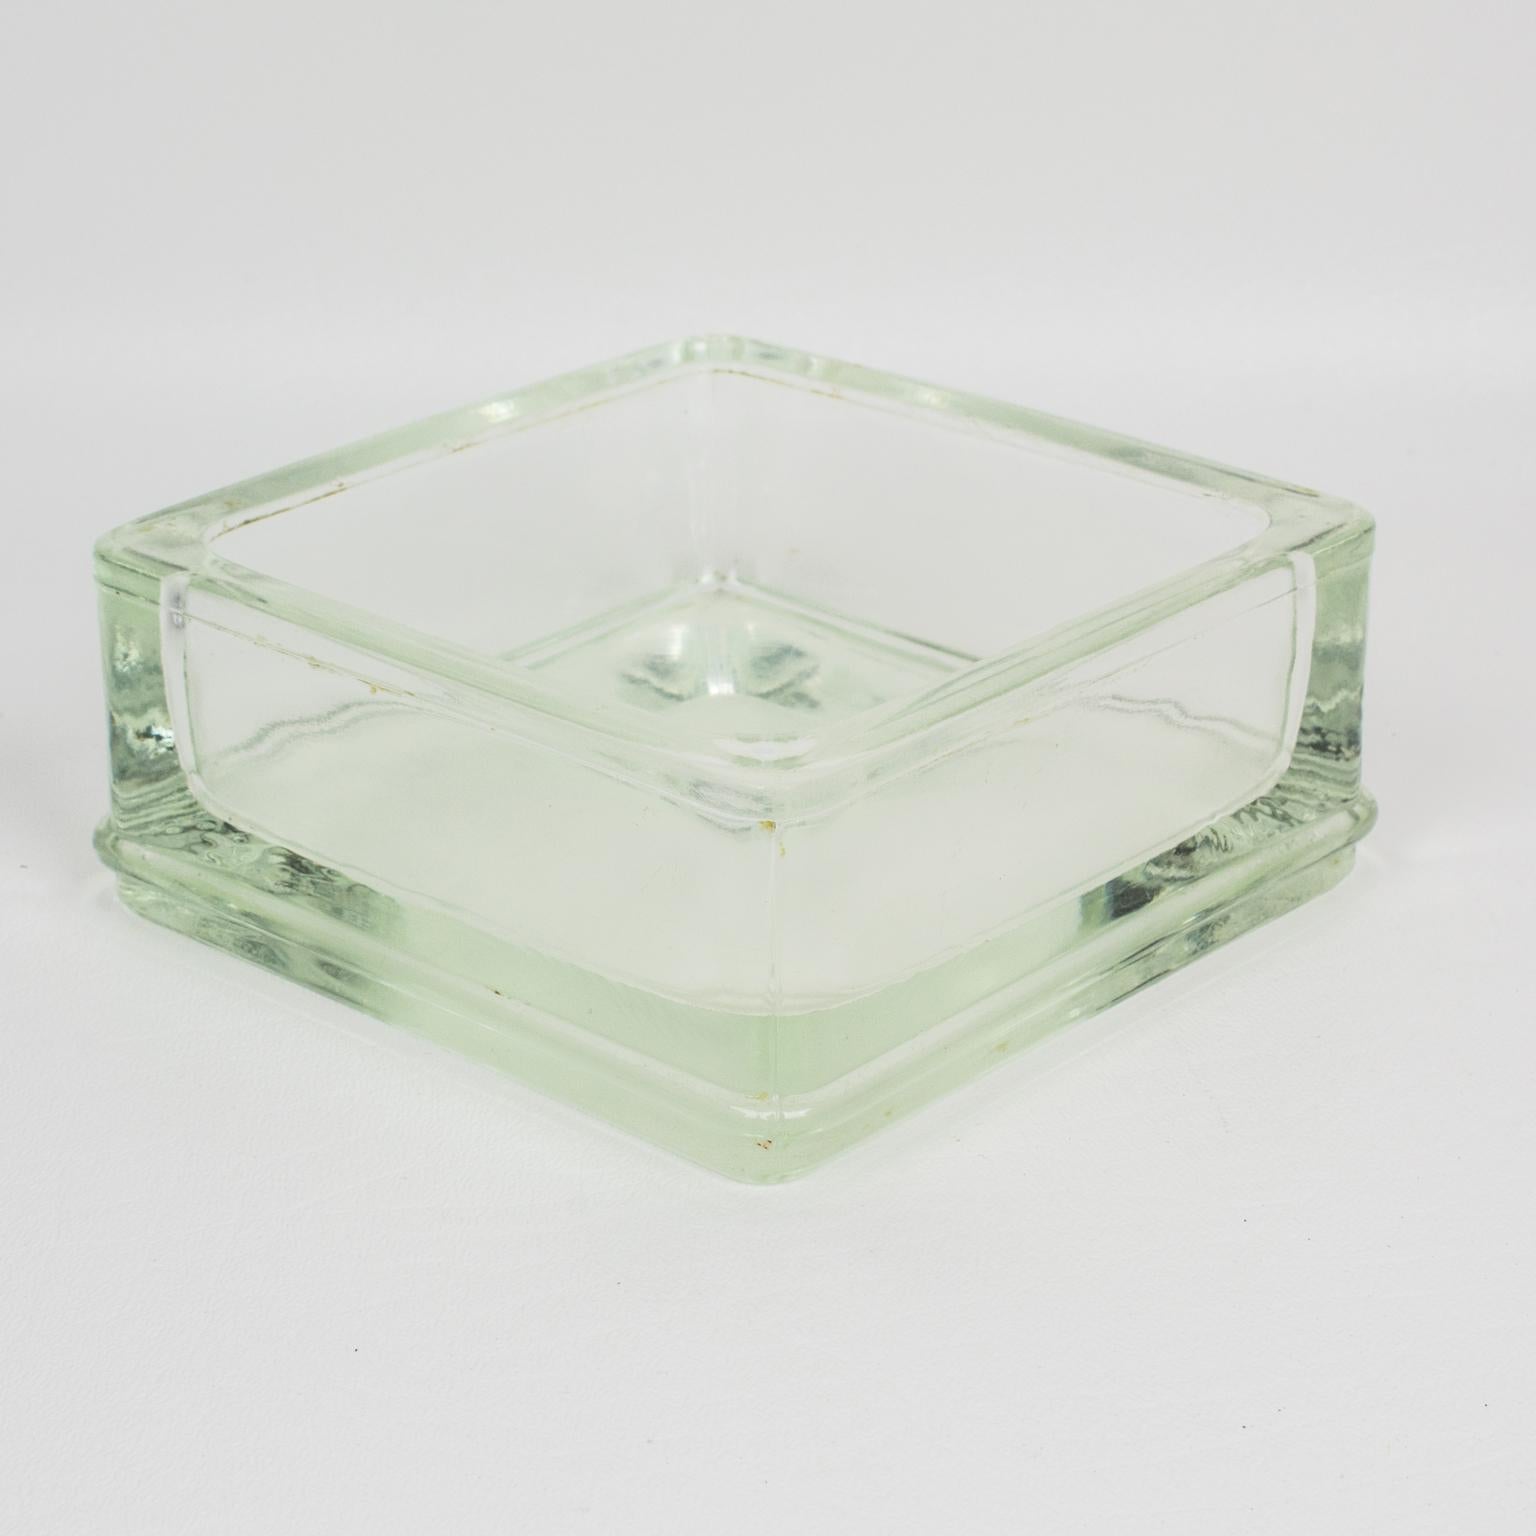 Designed by Le Corbusier for Lumax Molded Glass Desk Accessory Ashtray Catchall 1